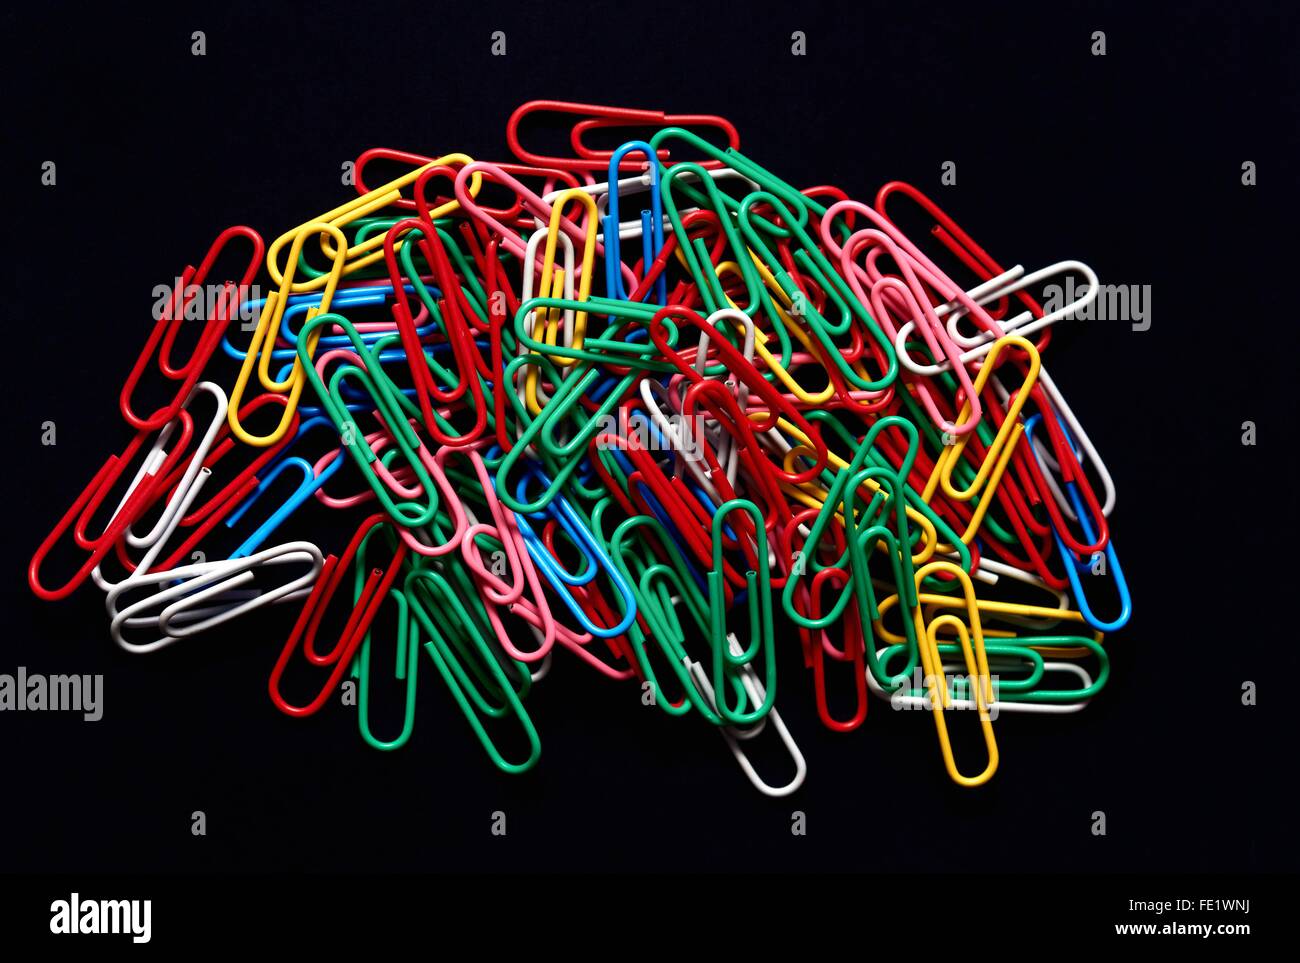 Colorful Paper Clips Stock Photo Alamy